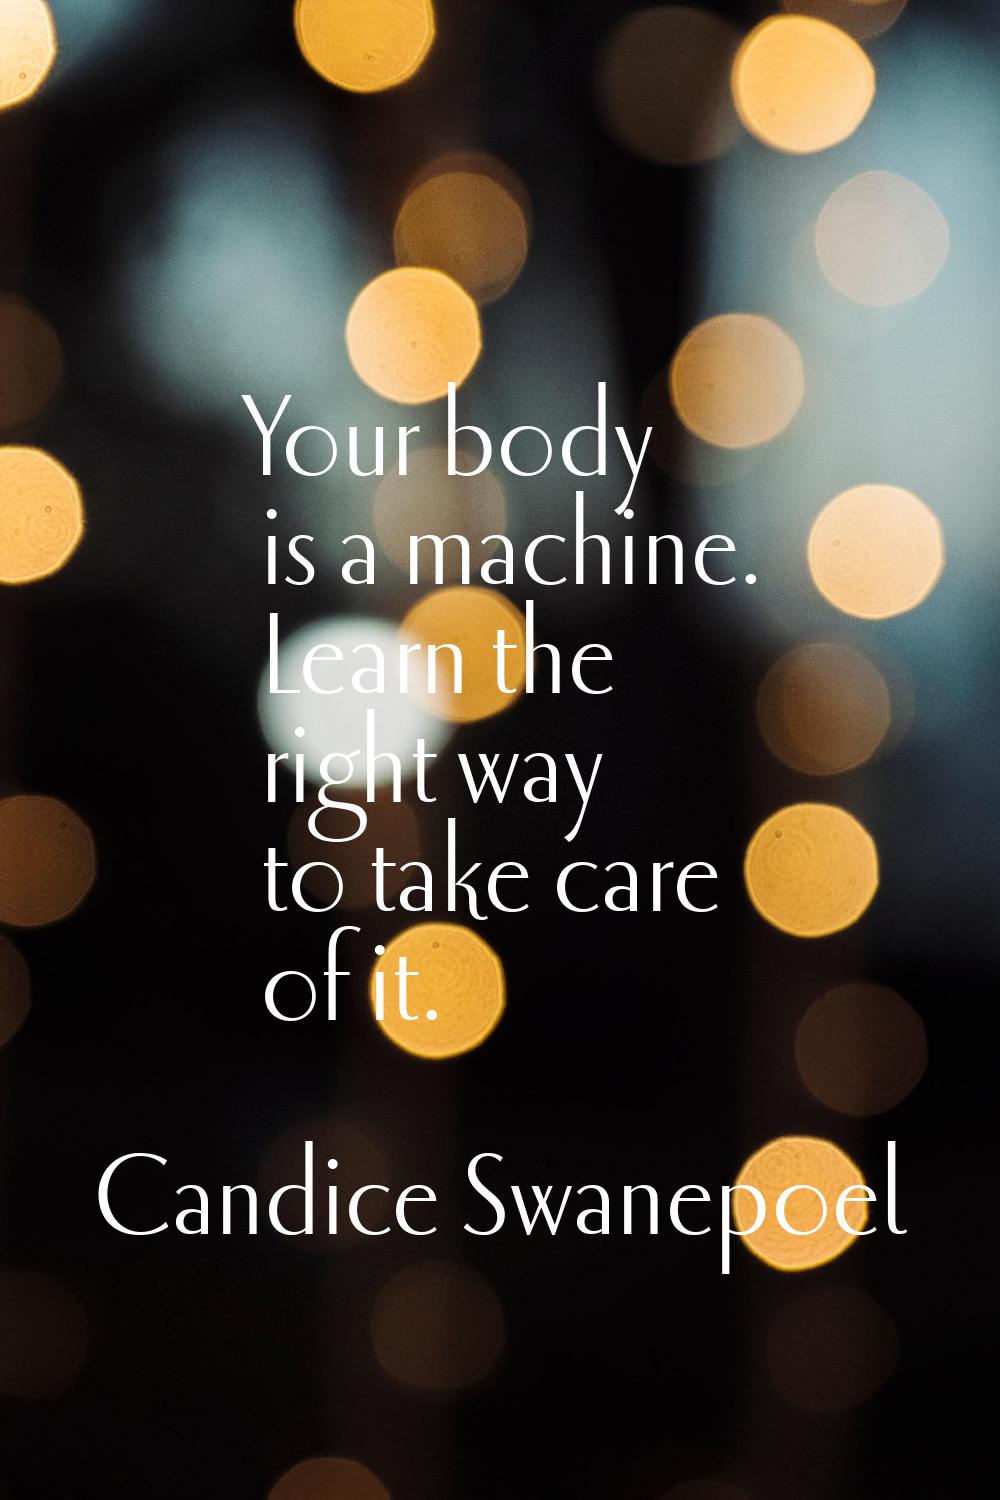 Your body is a machine. Learn the right way to take care of it.